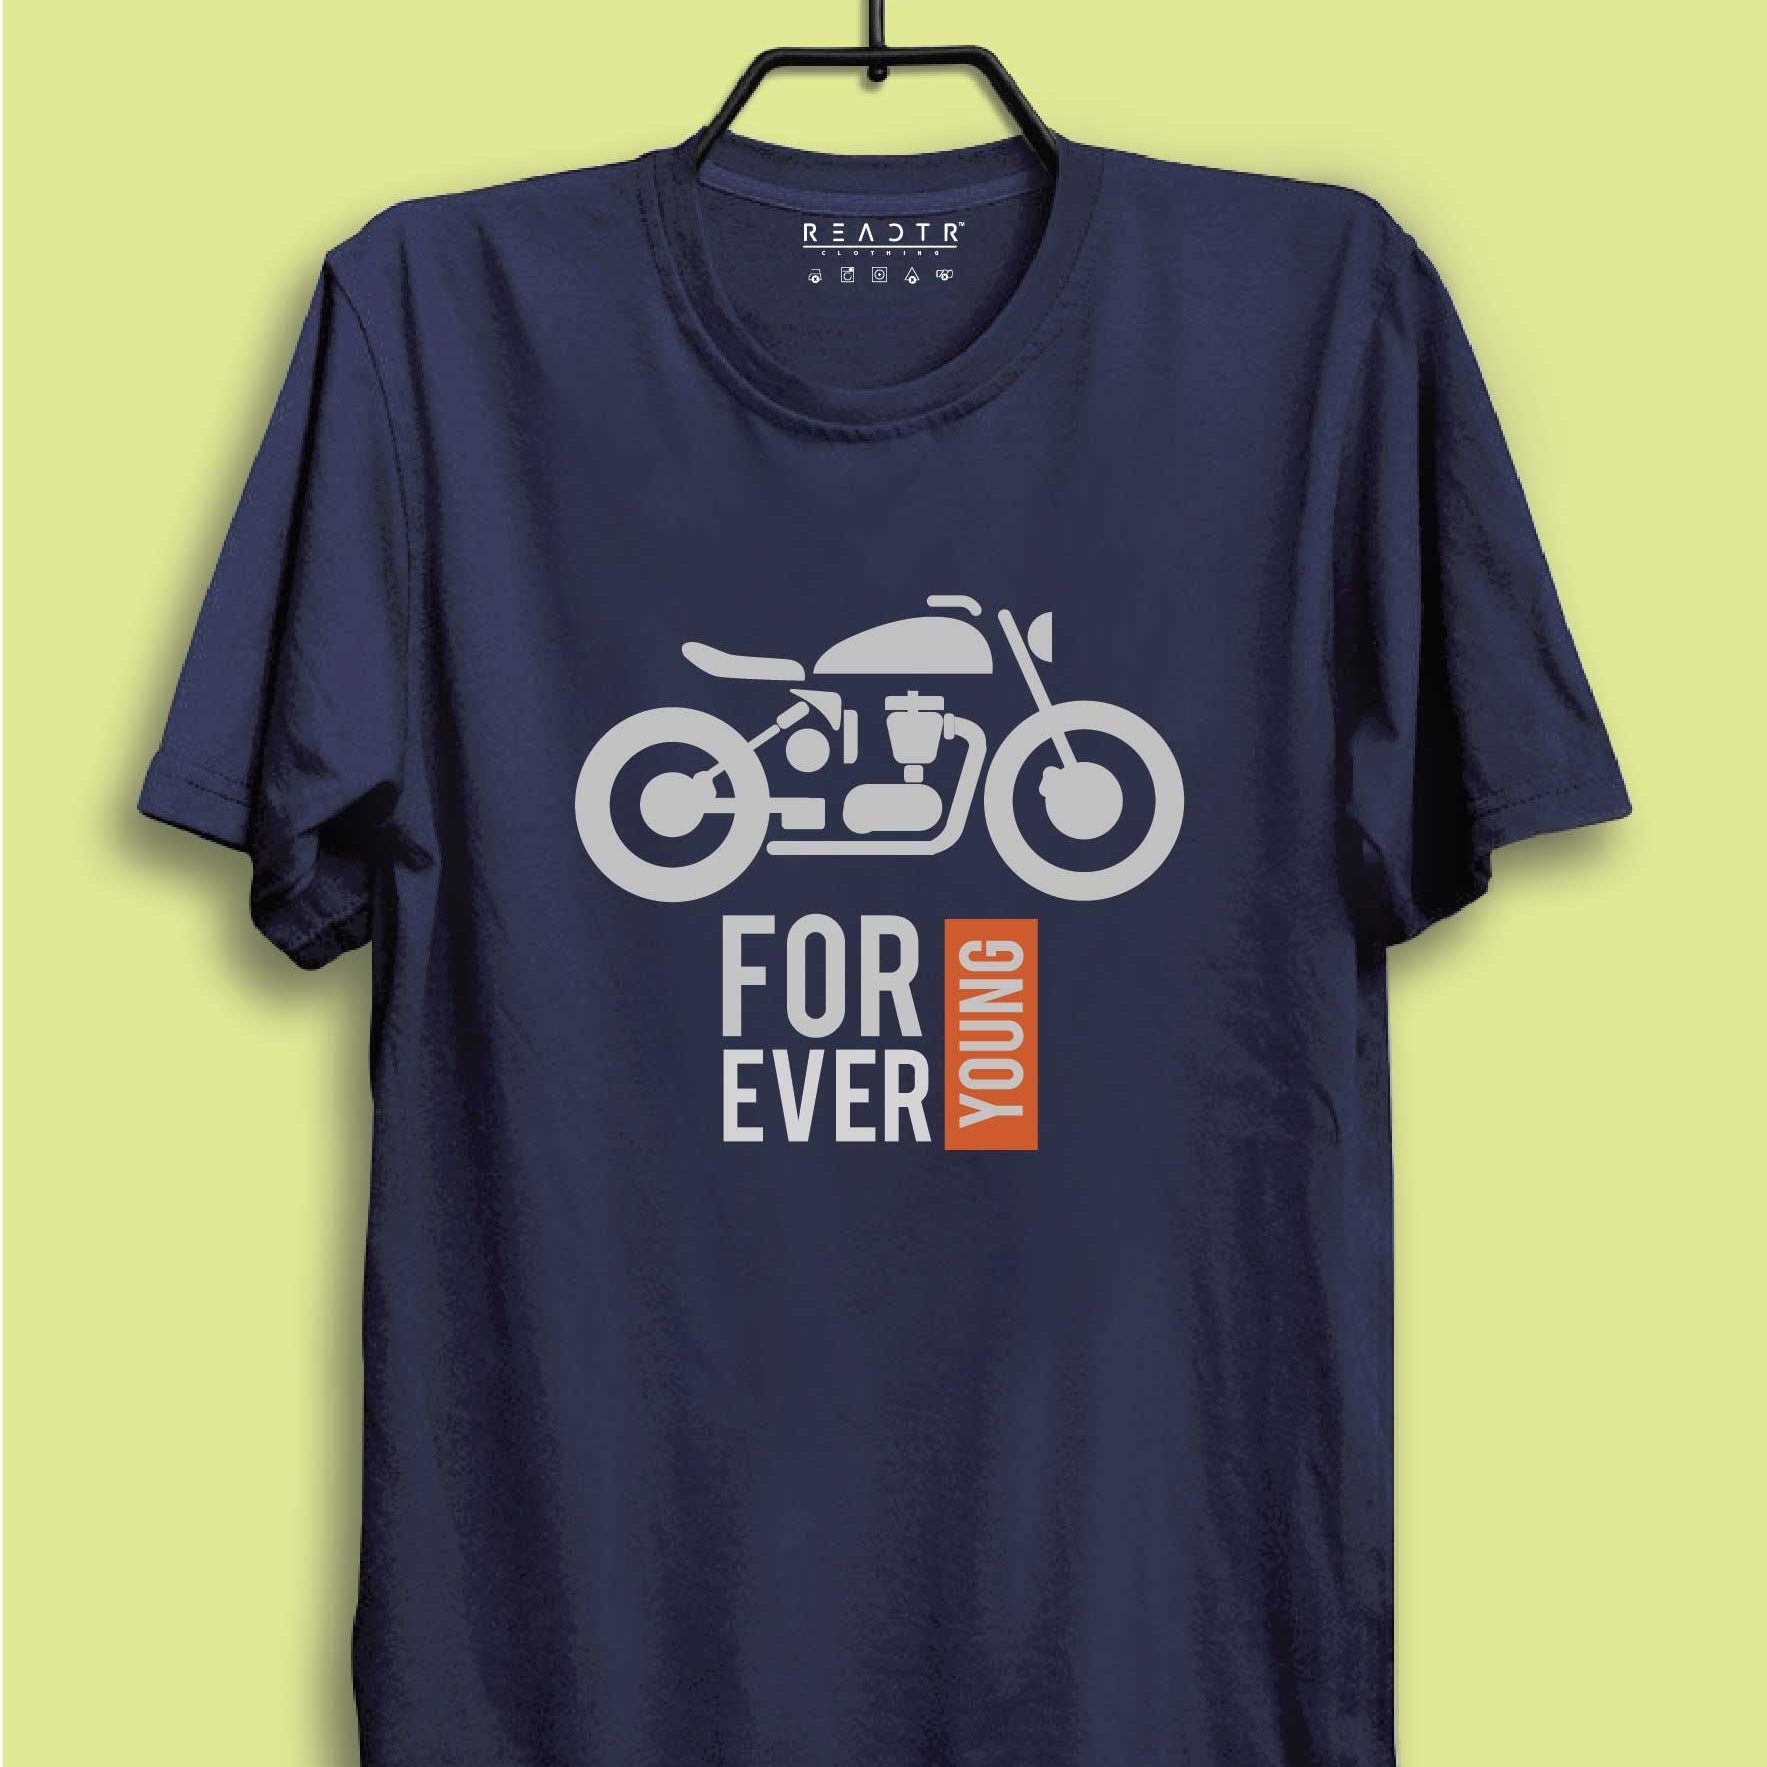 Forever Young Reactr Tshirts For Men - Eyewearlabs